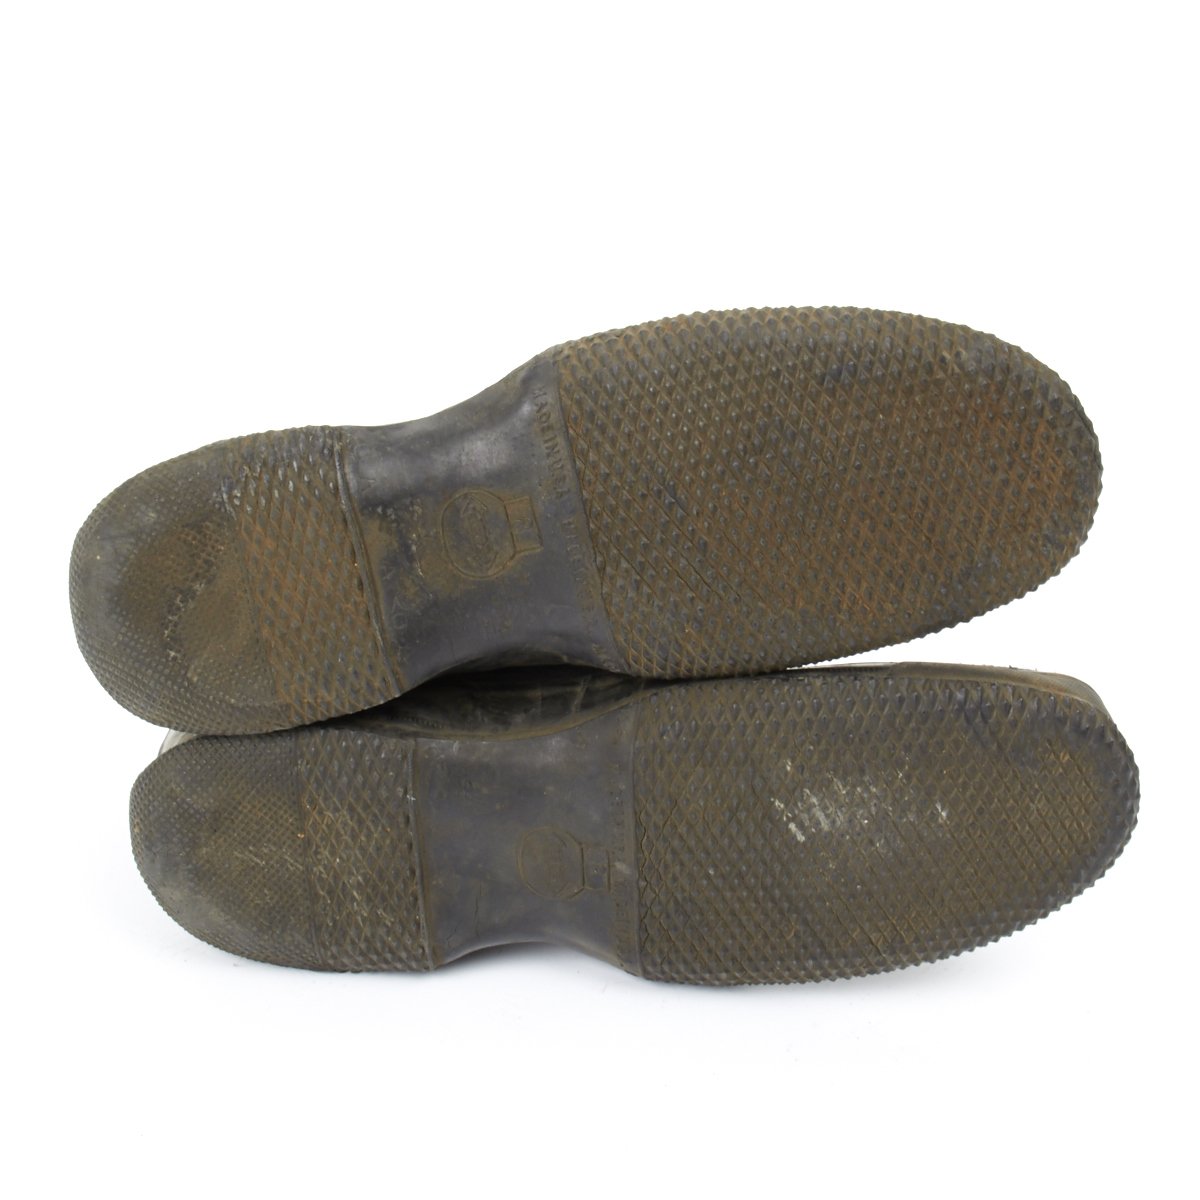 Original U.S. WWII Arctic Rubber Overshoes with 4 Buckle Cloth Top ...